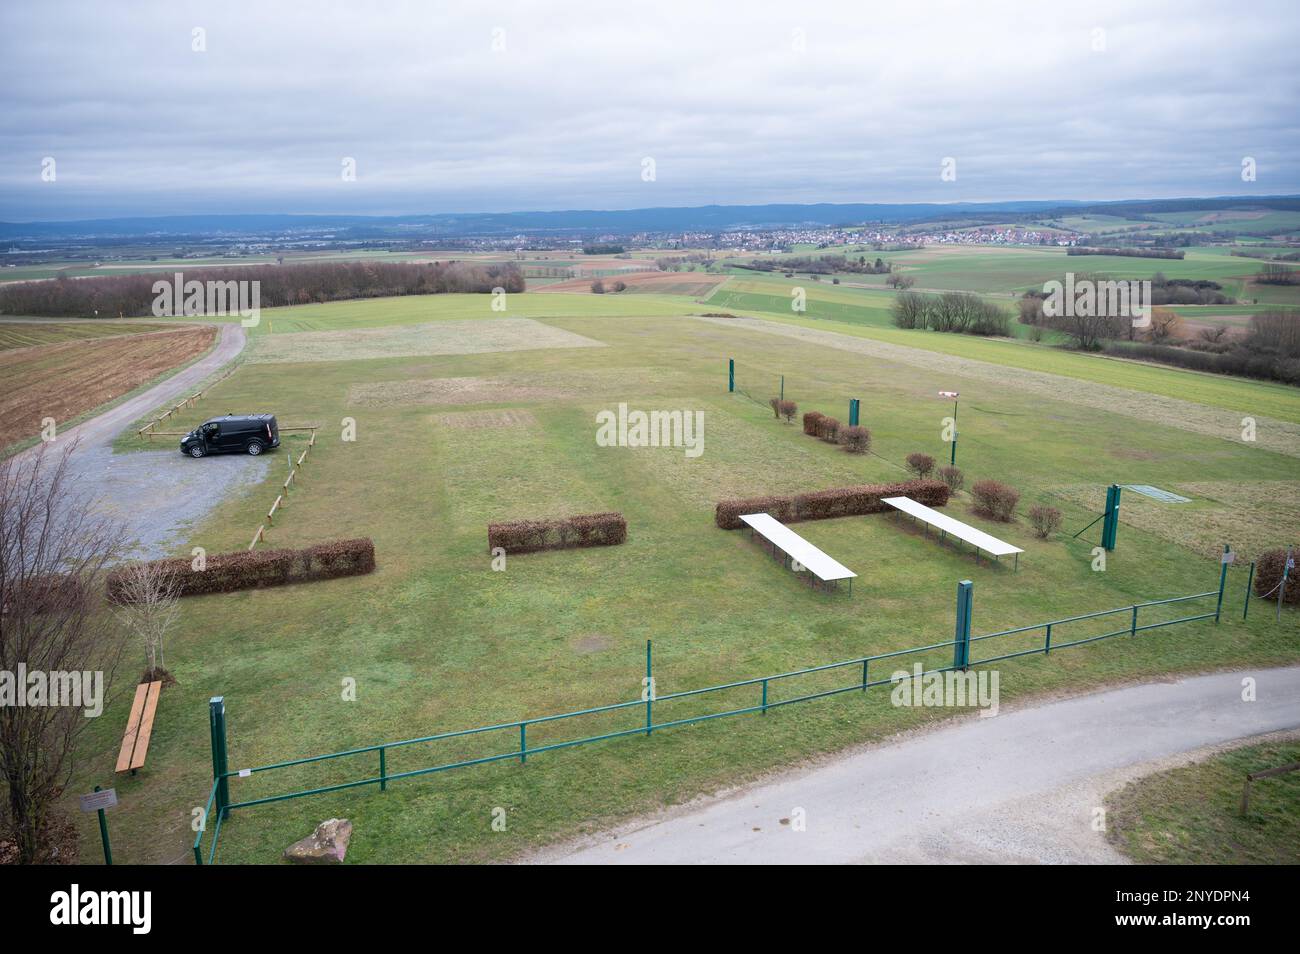 Model airfield in Schaafheim during cloudy stormy day, strong crosswind, countryside, Germany Stock Photo